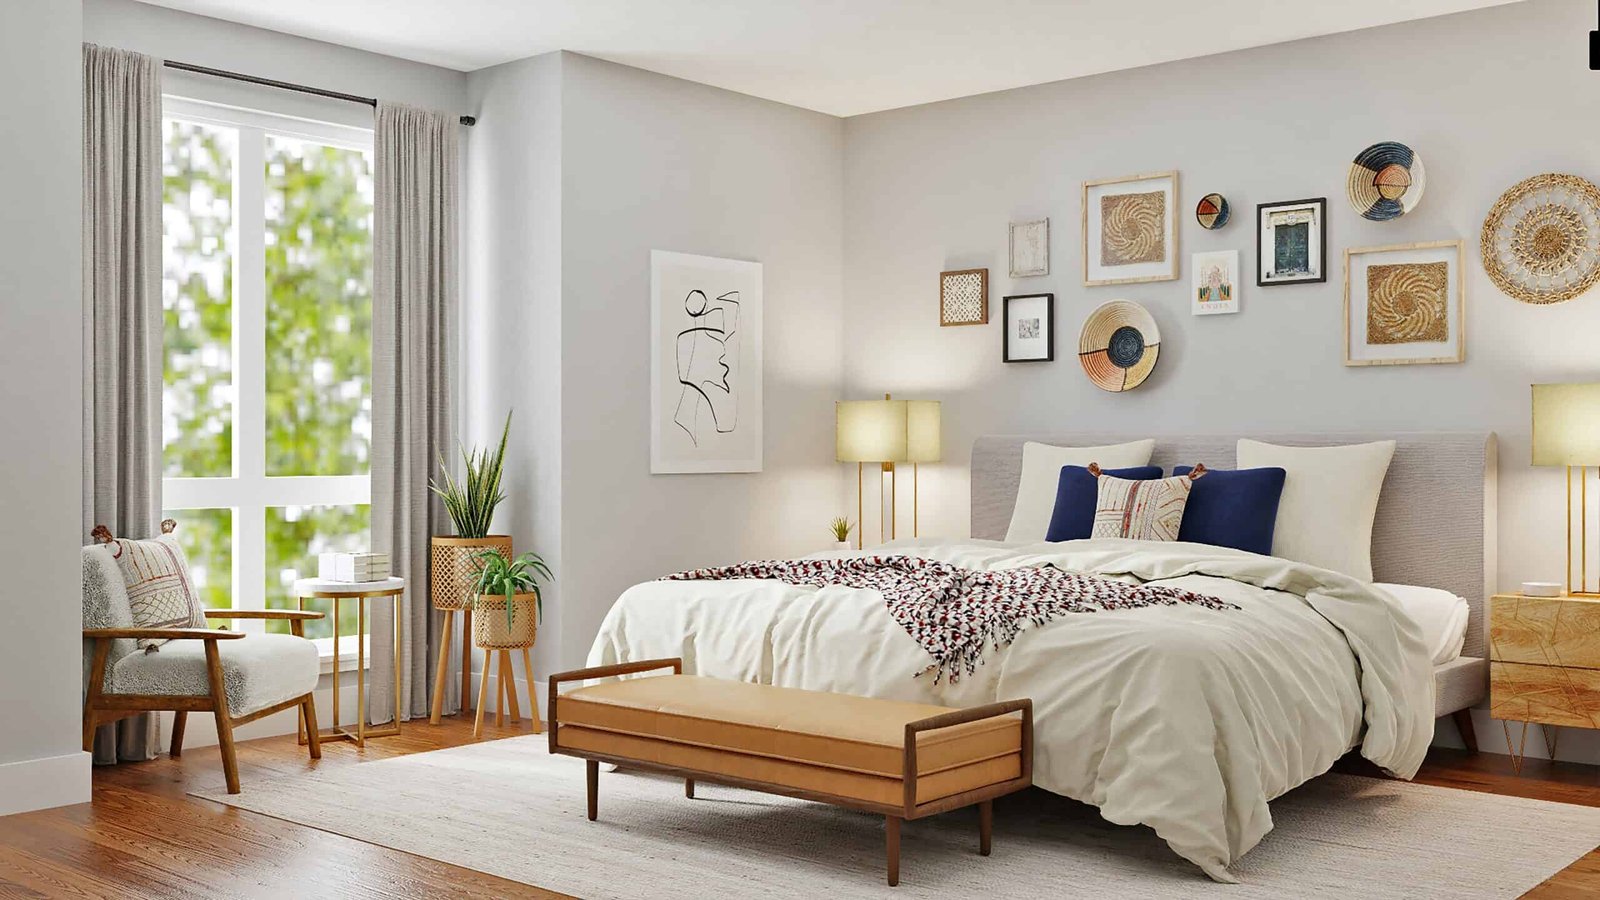 Transform Your Bedroom: A Guide to Planning Your Dream Space